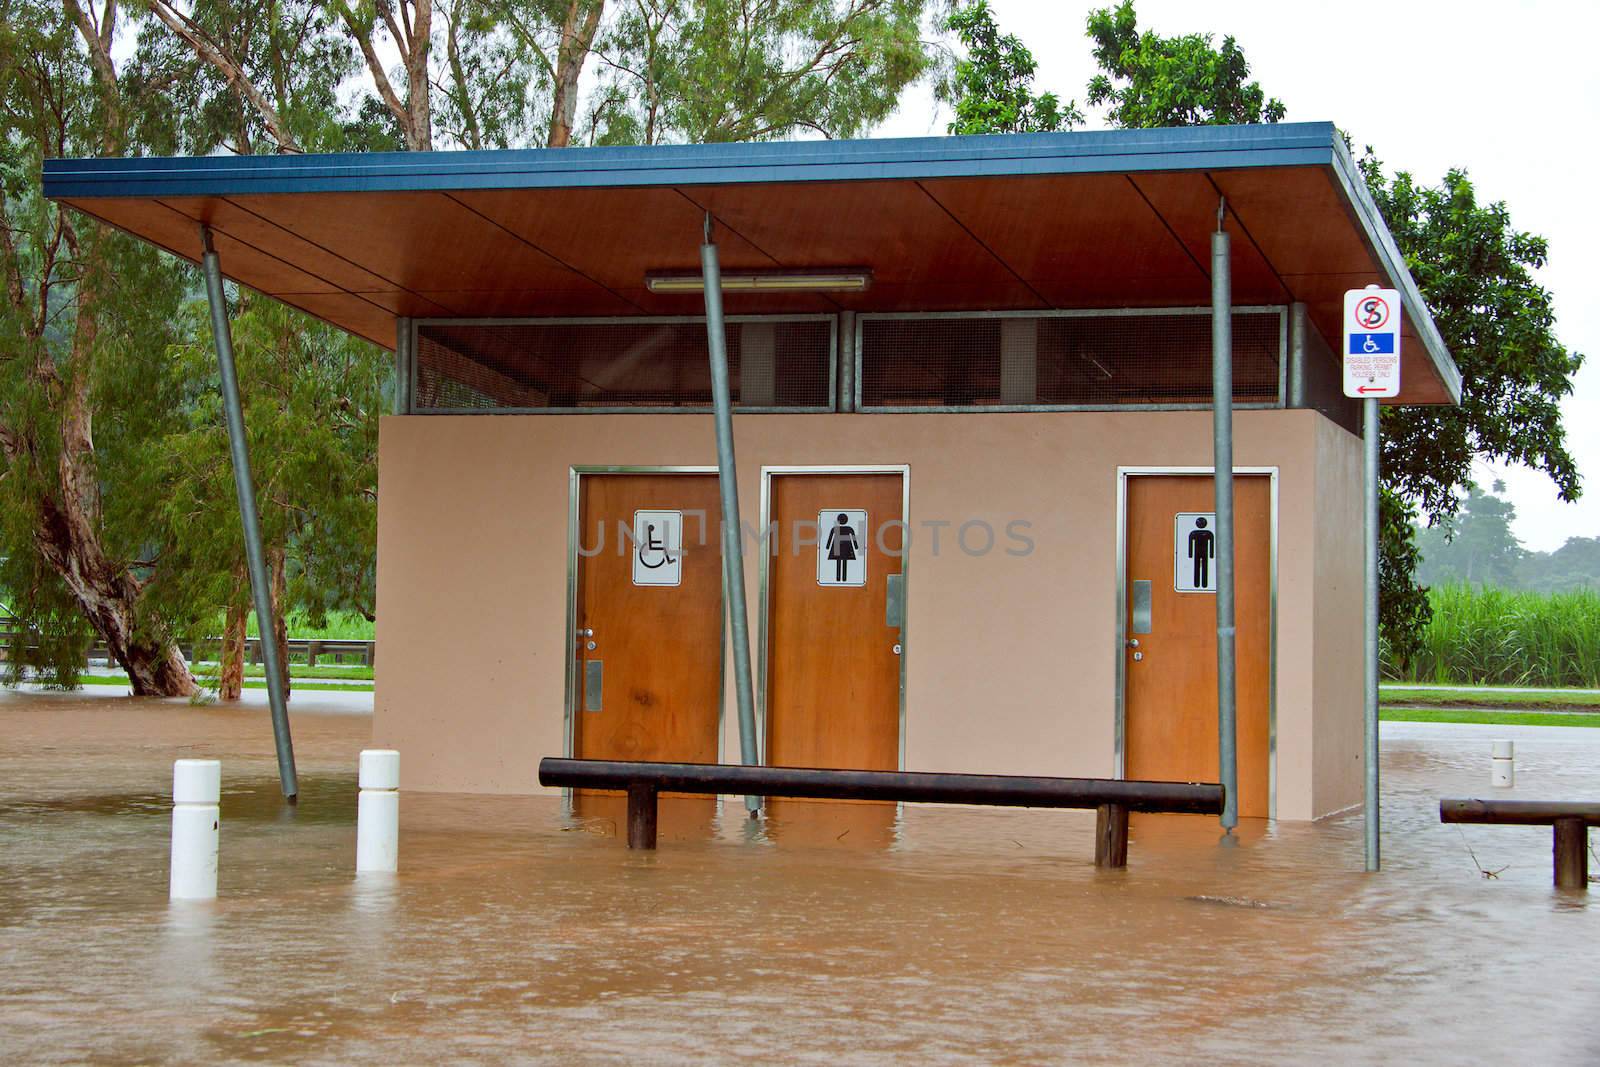 Public toilets and bathrooms flooded in Queensland, Australia by Jaykayl